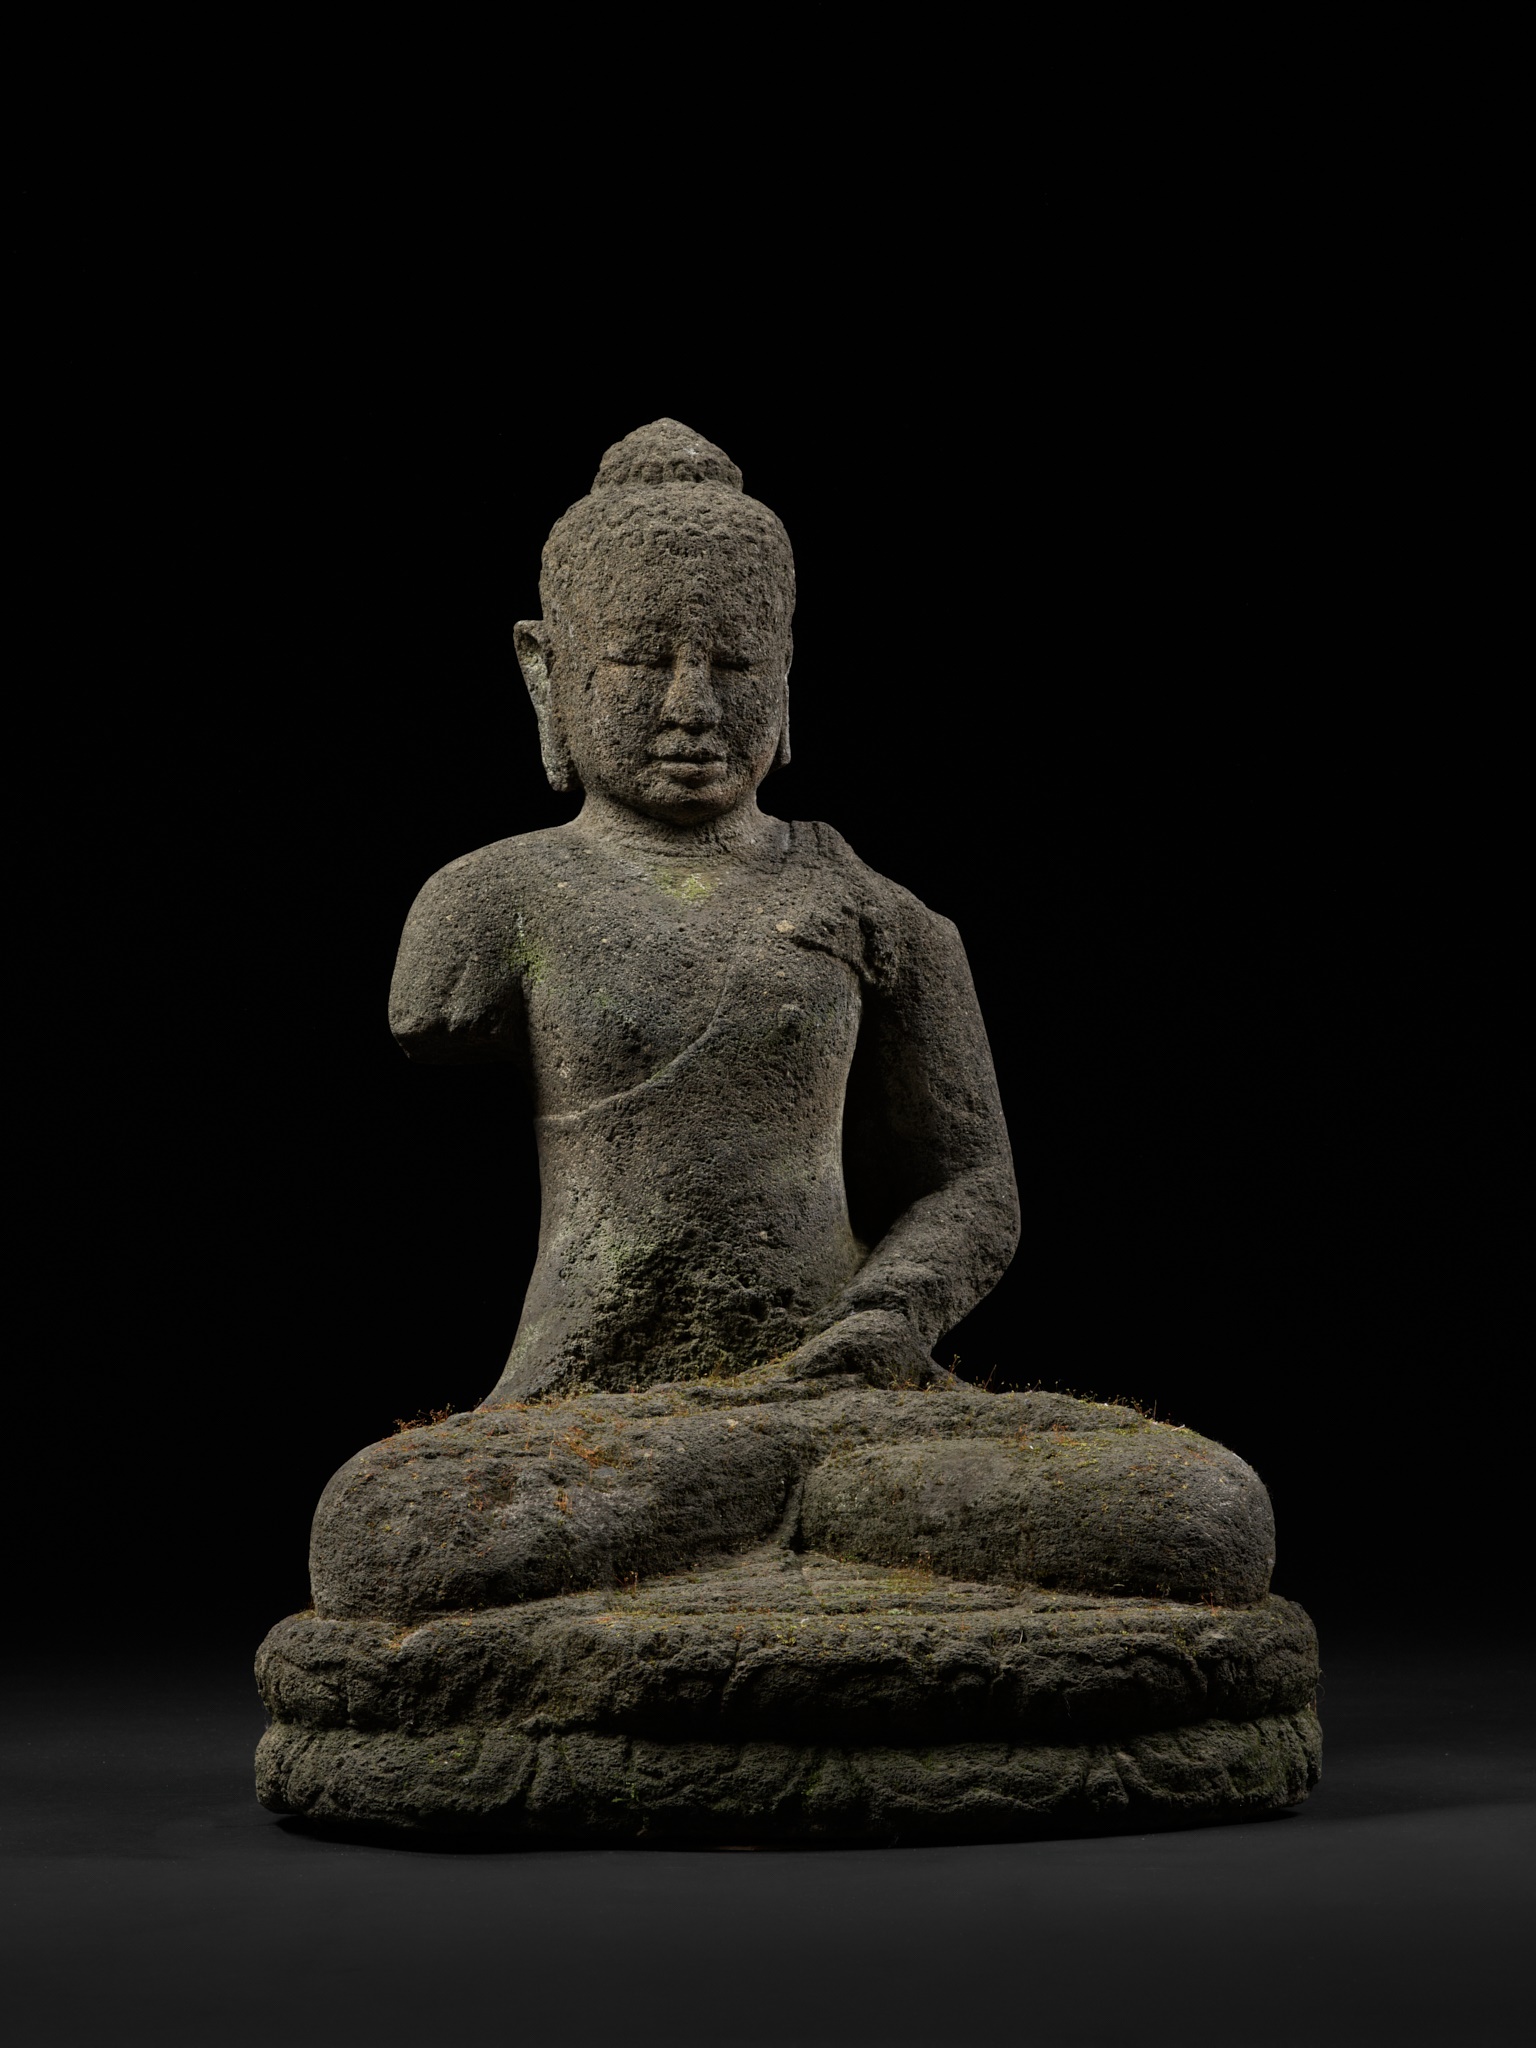 A VOLCANIC STONE FIGURE OF BUDDHA, CENTRAL JAVA, INDONESIA, FIRST HALF OF THE 9TH CENTURY - Image 6 of 14